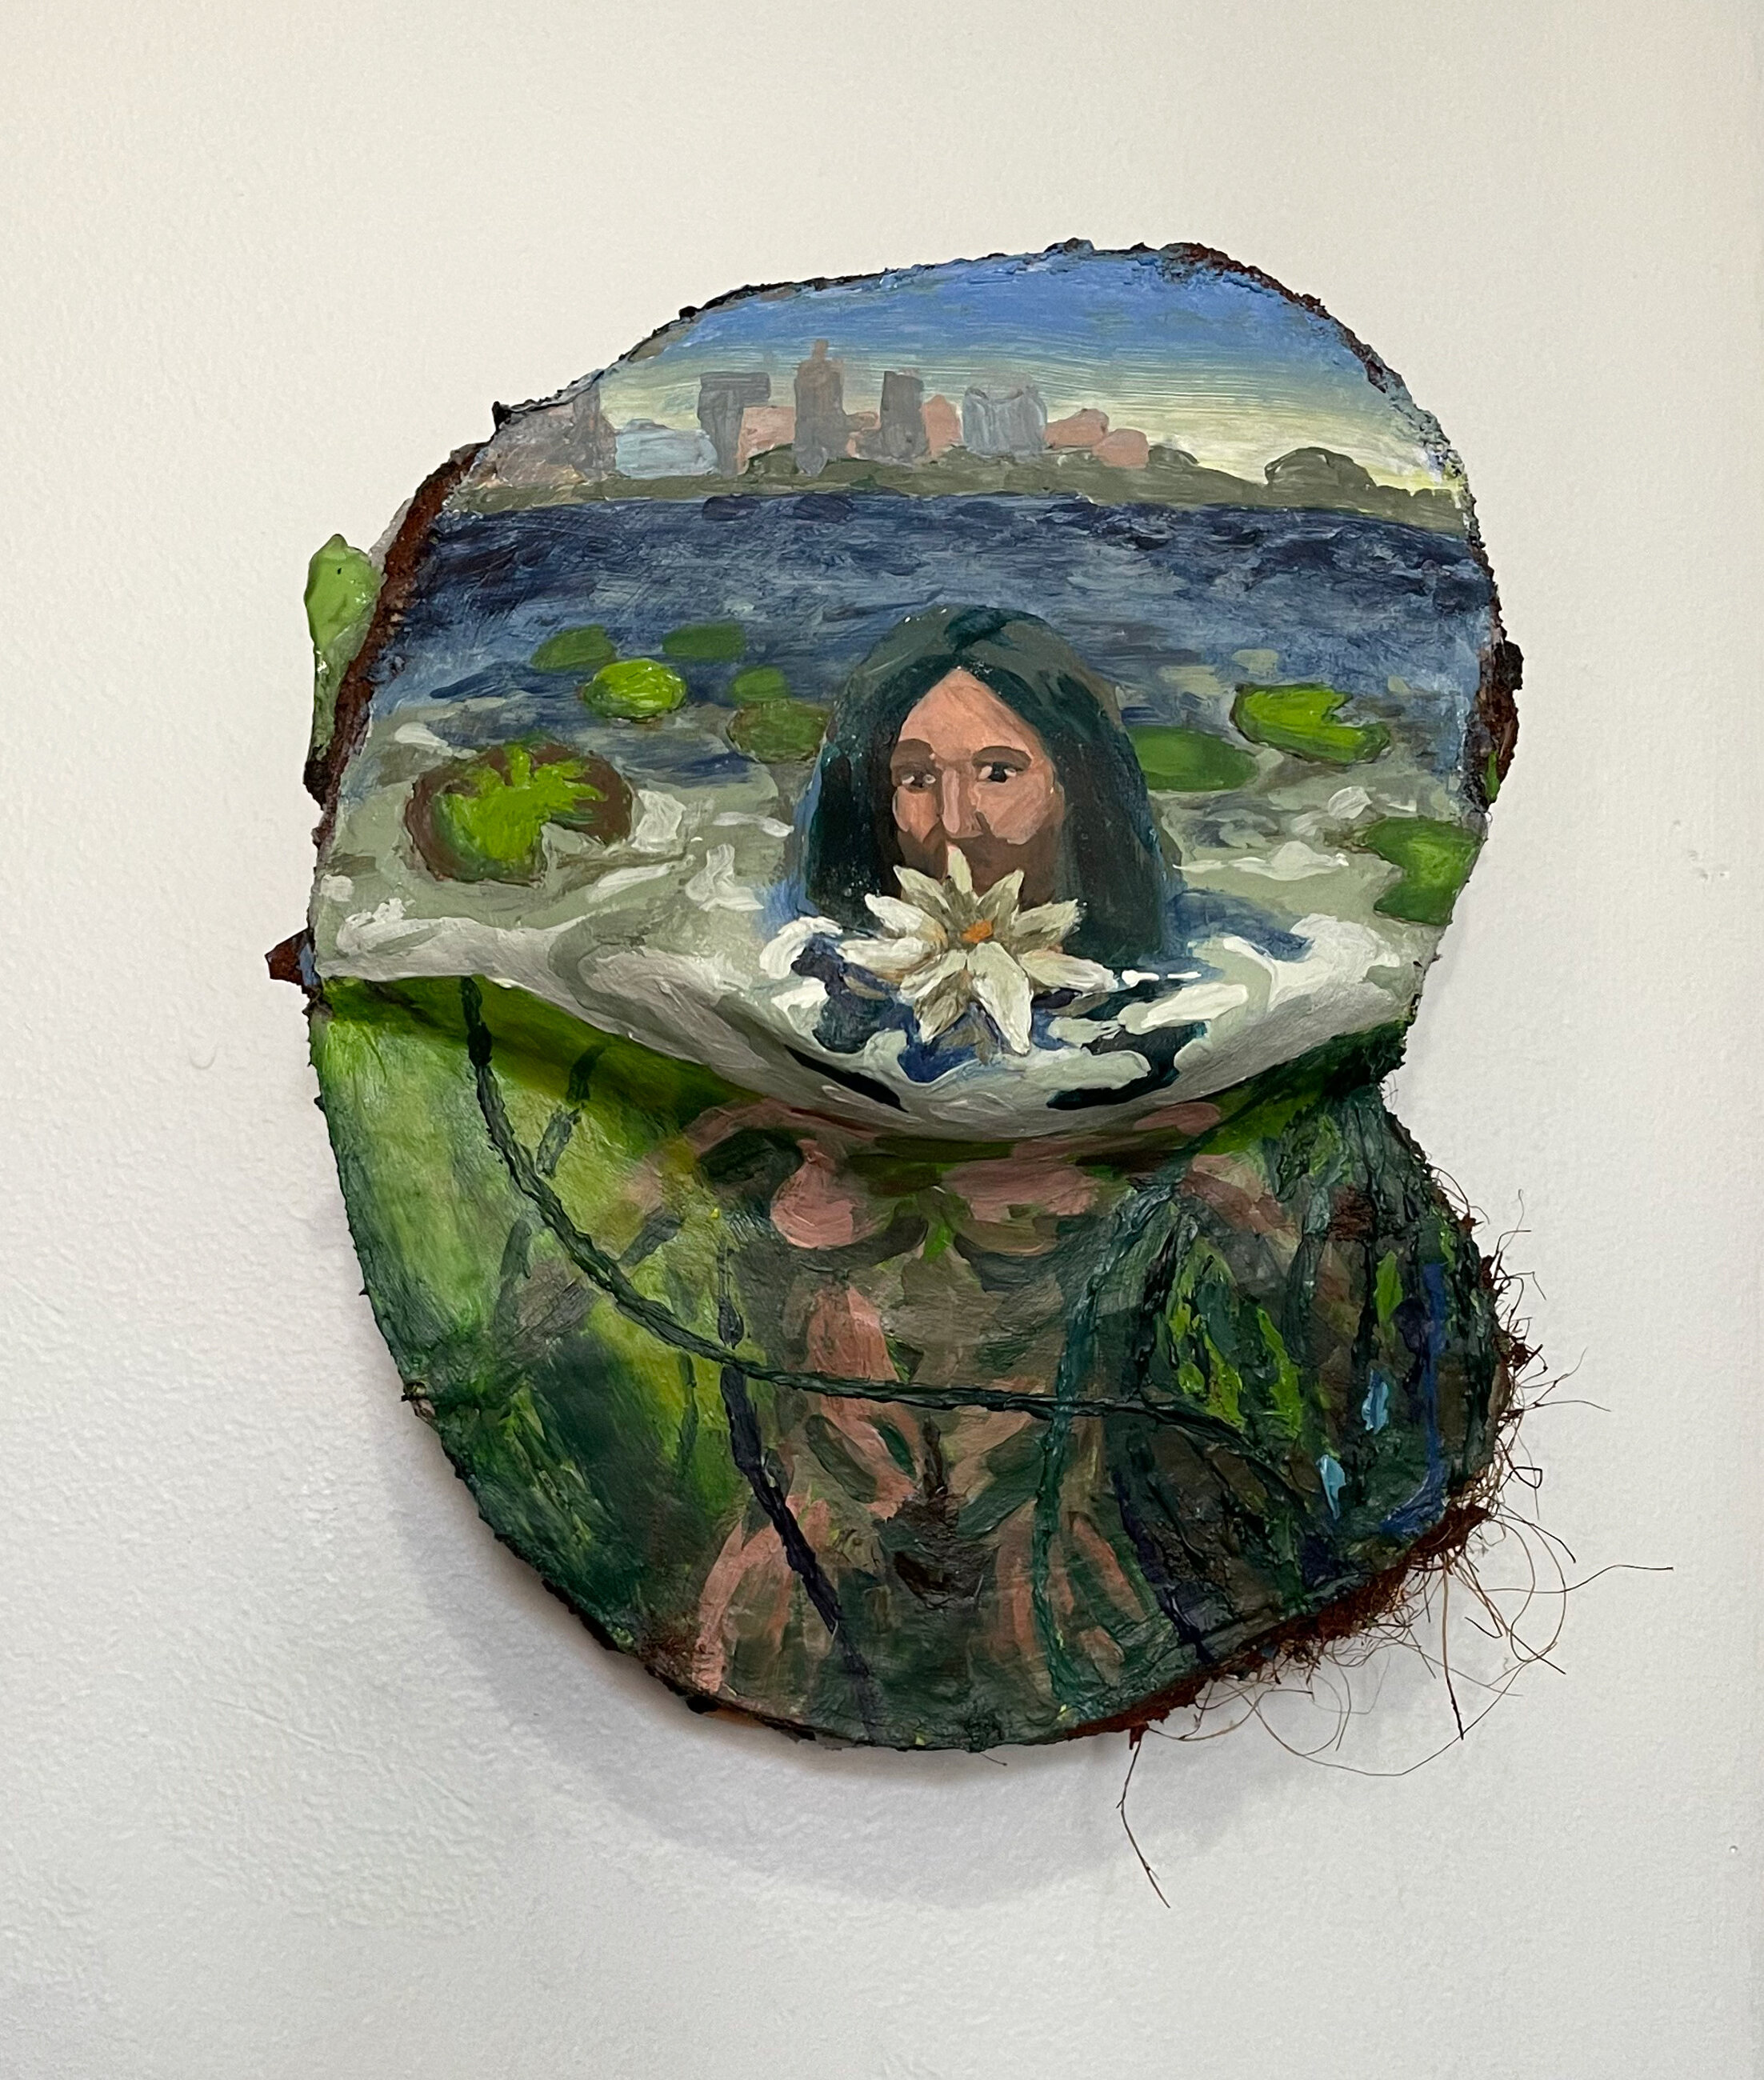  “East River Dreams”, 9h x 8w x 3d in, Acrylic on cardboard, insulation foam, pottery shards, candy wrappers, and sea glass, 2021 